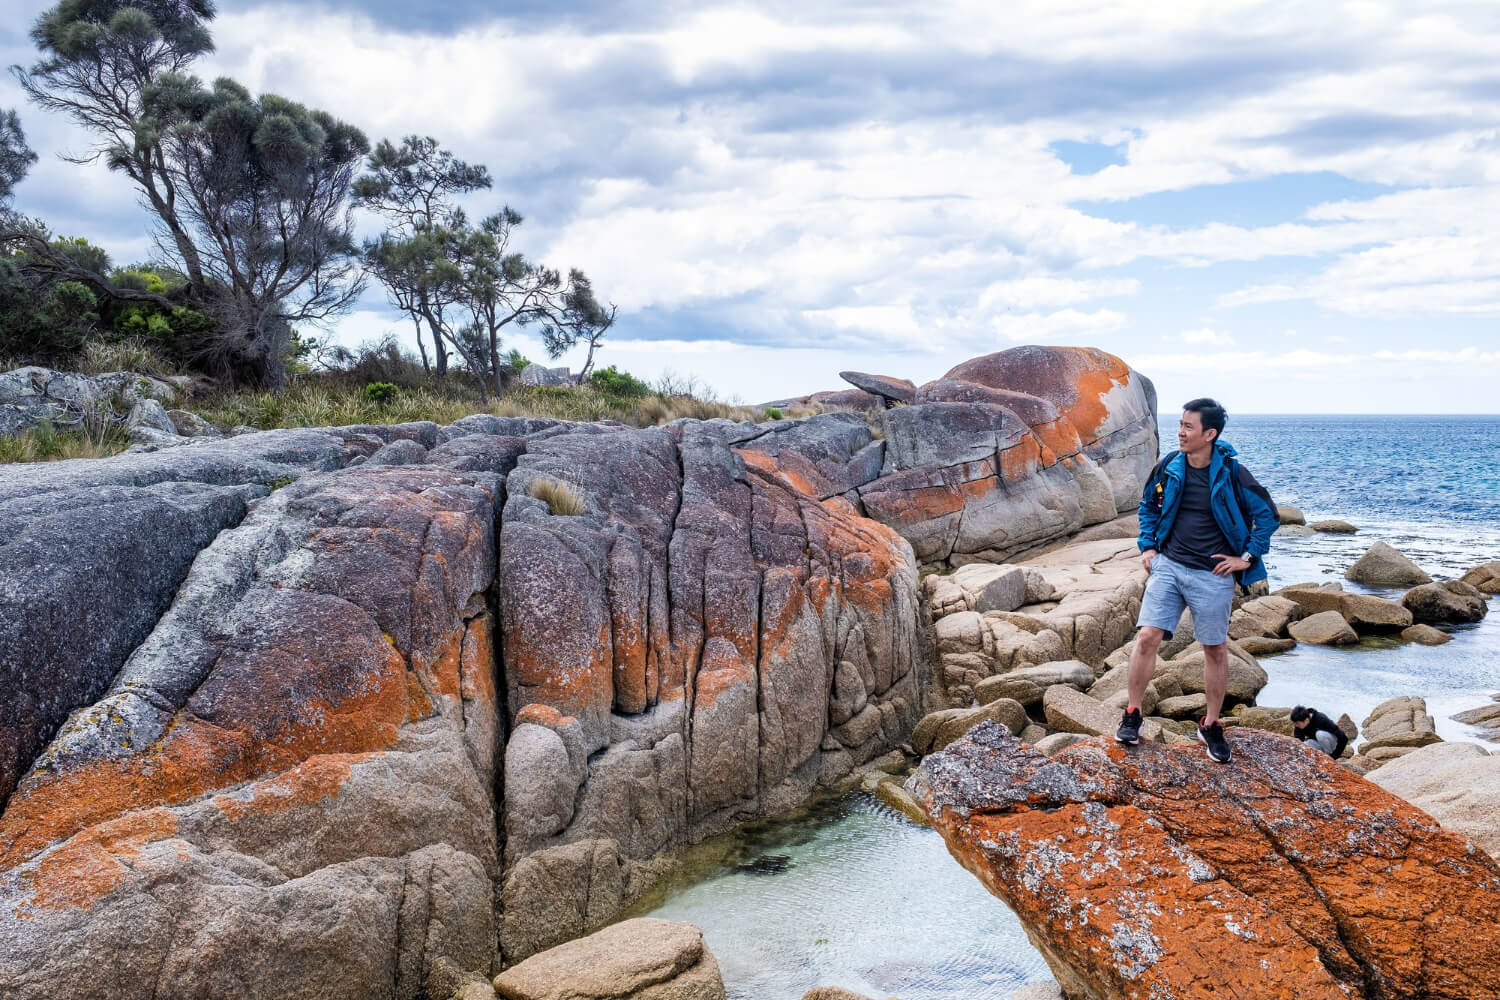 What Couples, Friends, & Families Can Enjoy in Tasmania